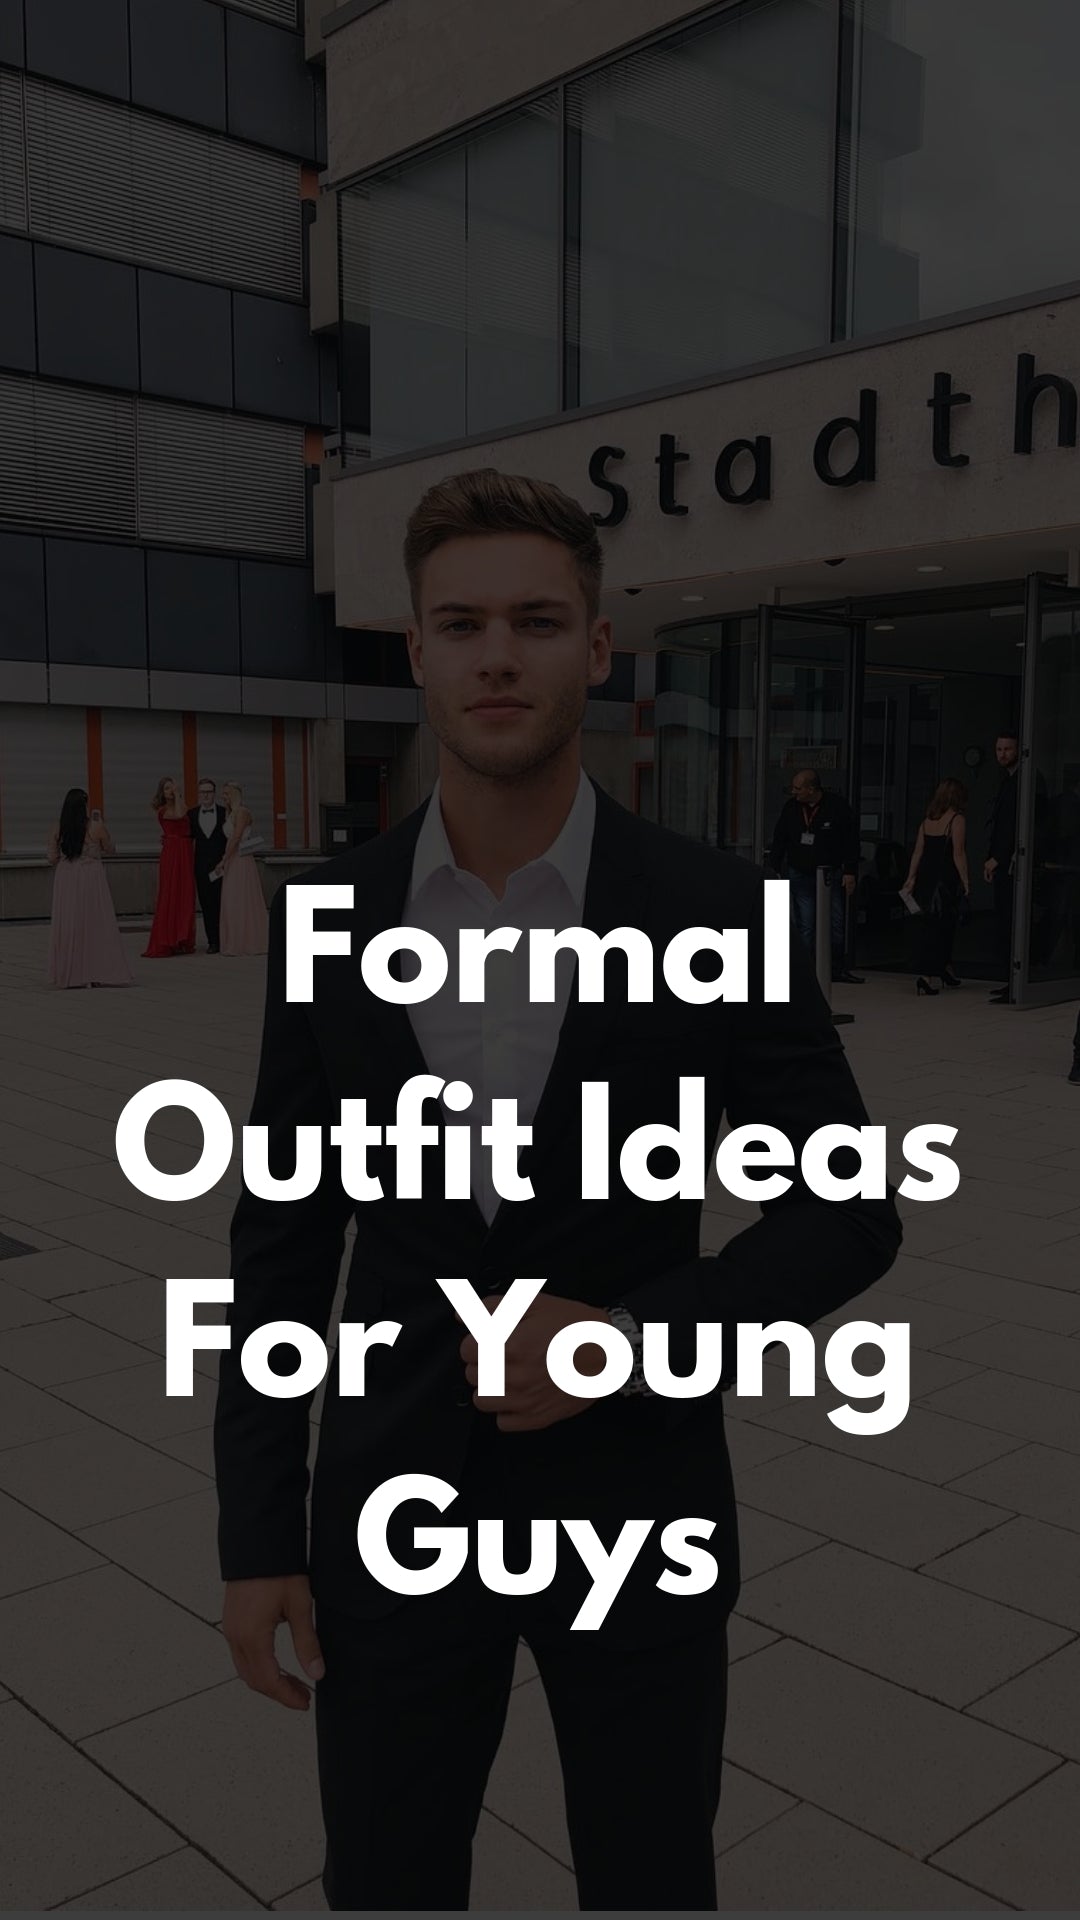 Formal Outfit Ideas For Young Guys #formal #style #mensfashion